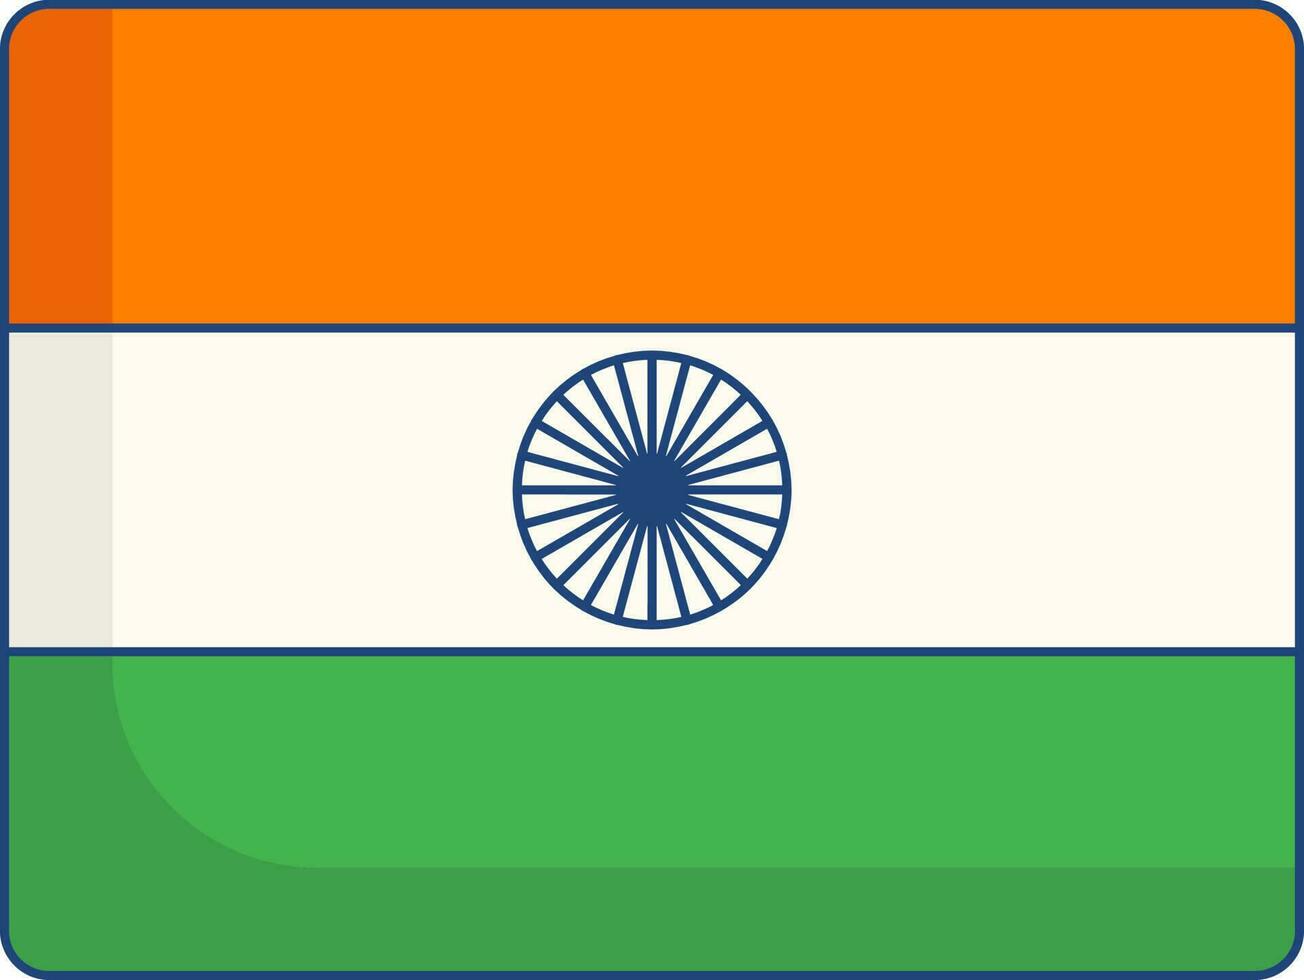 Isolated Tricolor Indian National Flag In Flat Design. vector